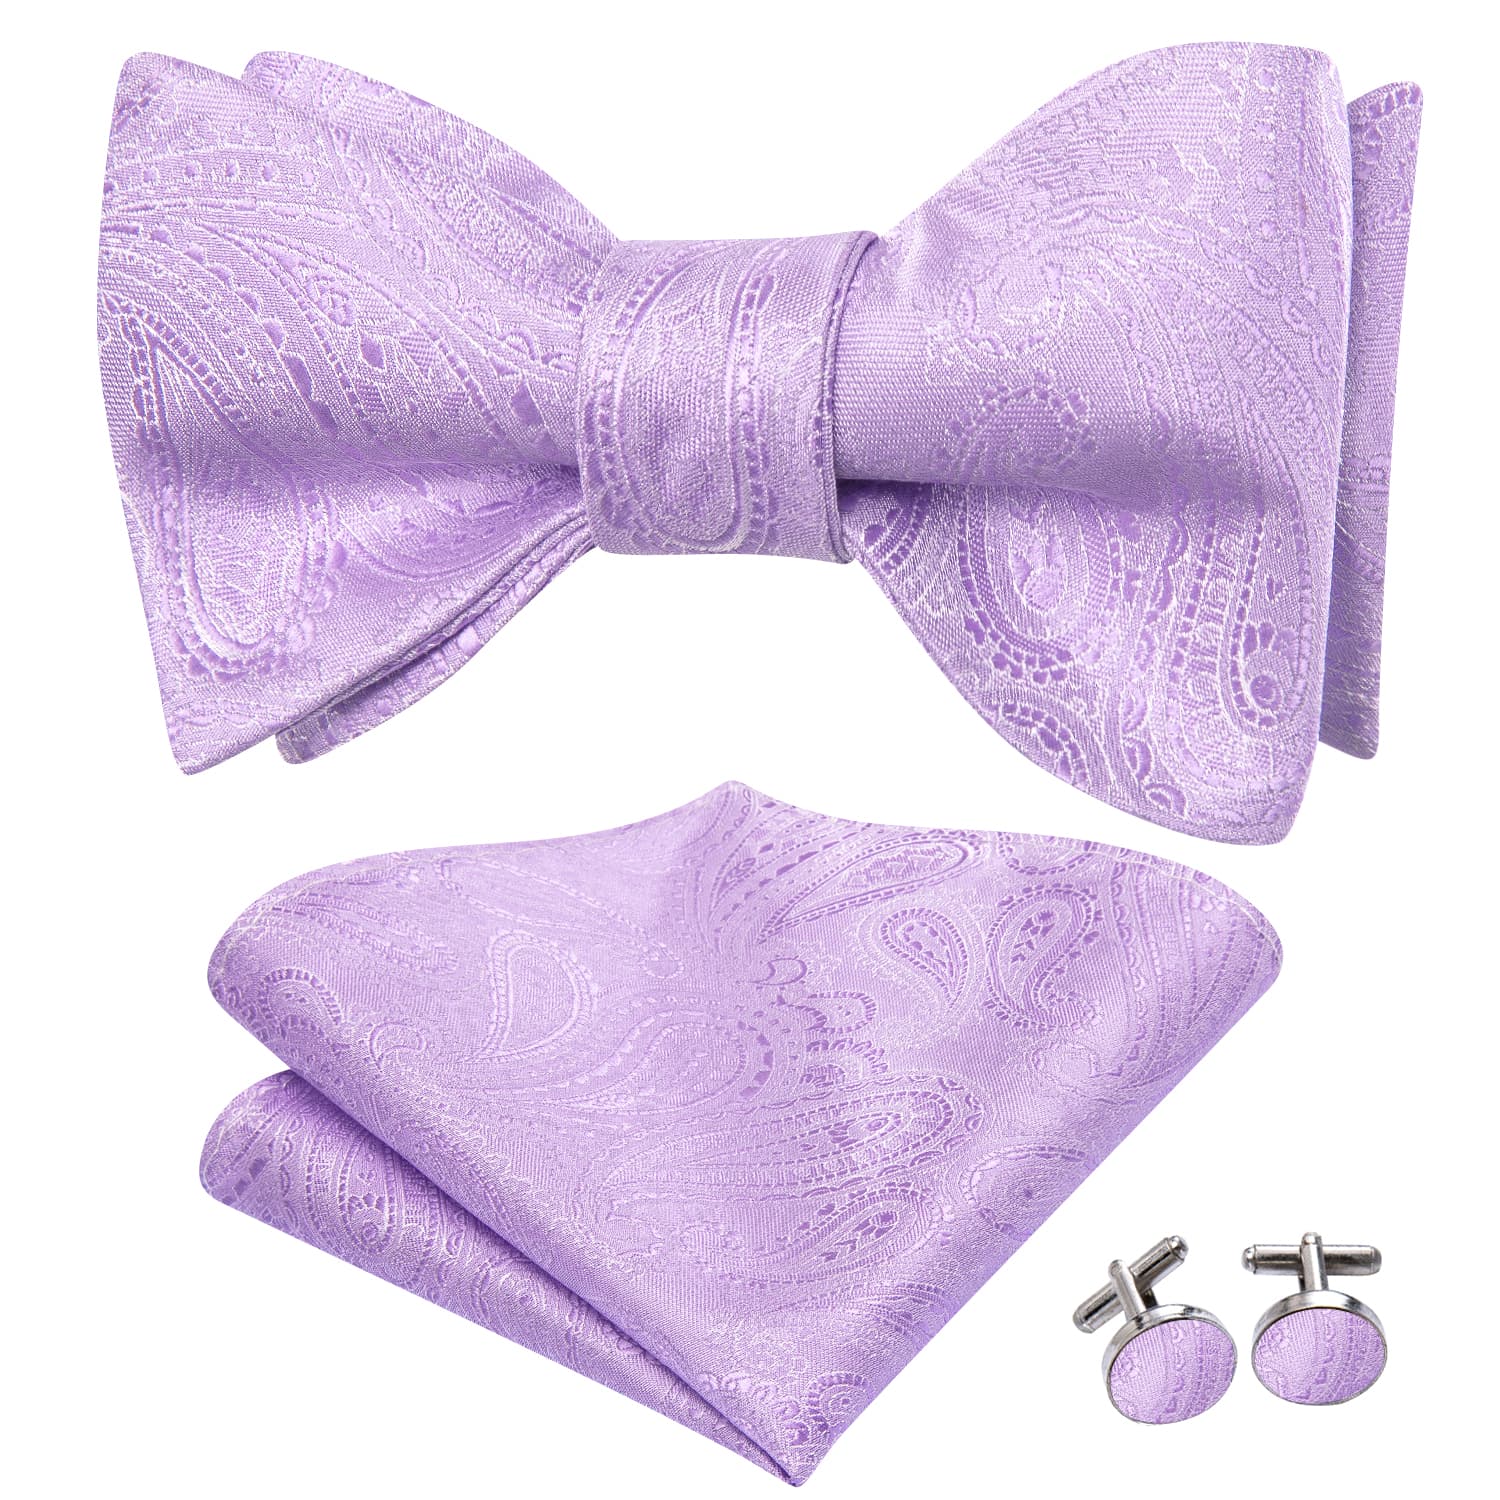 purple bow tie for men and pocket square in same pattern 